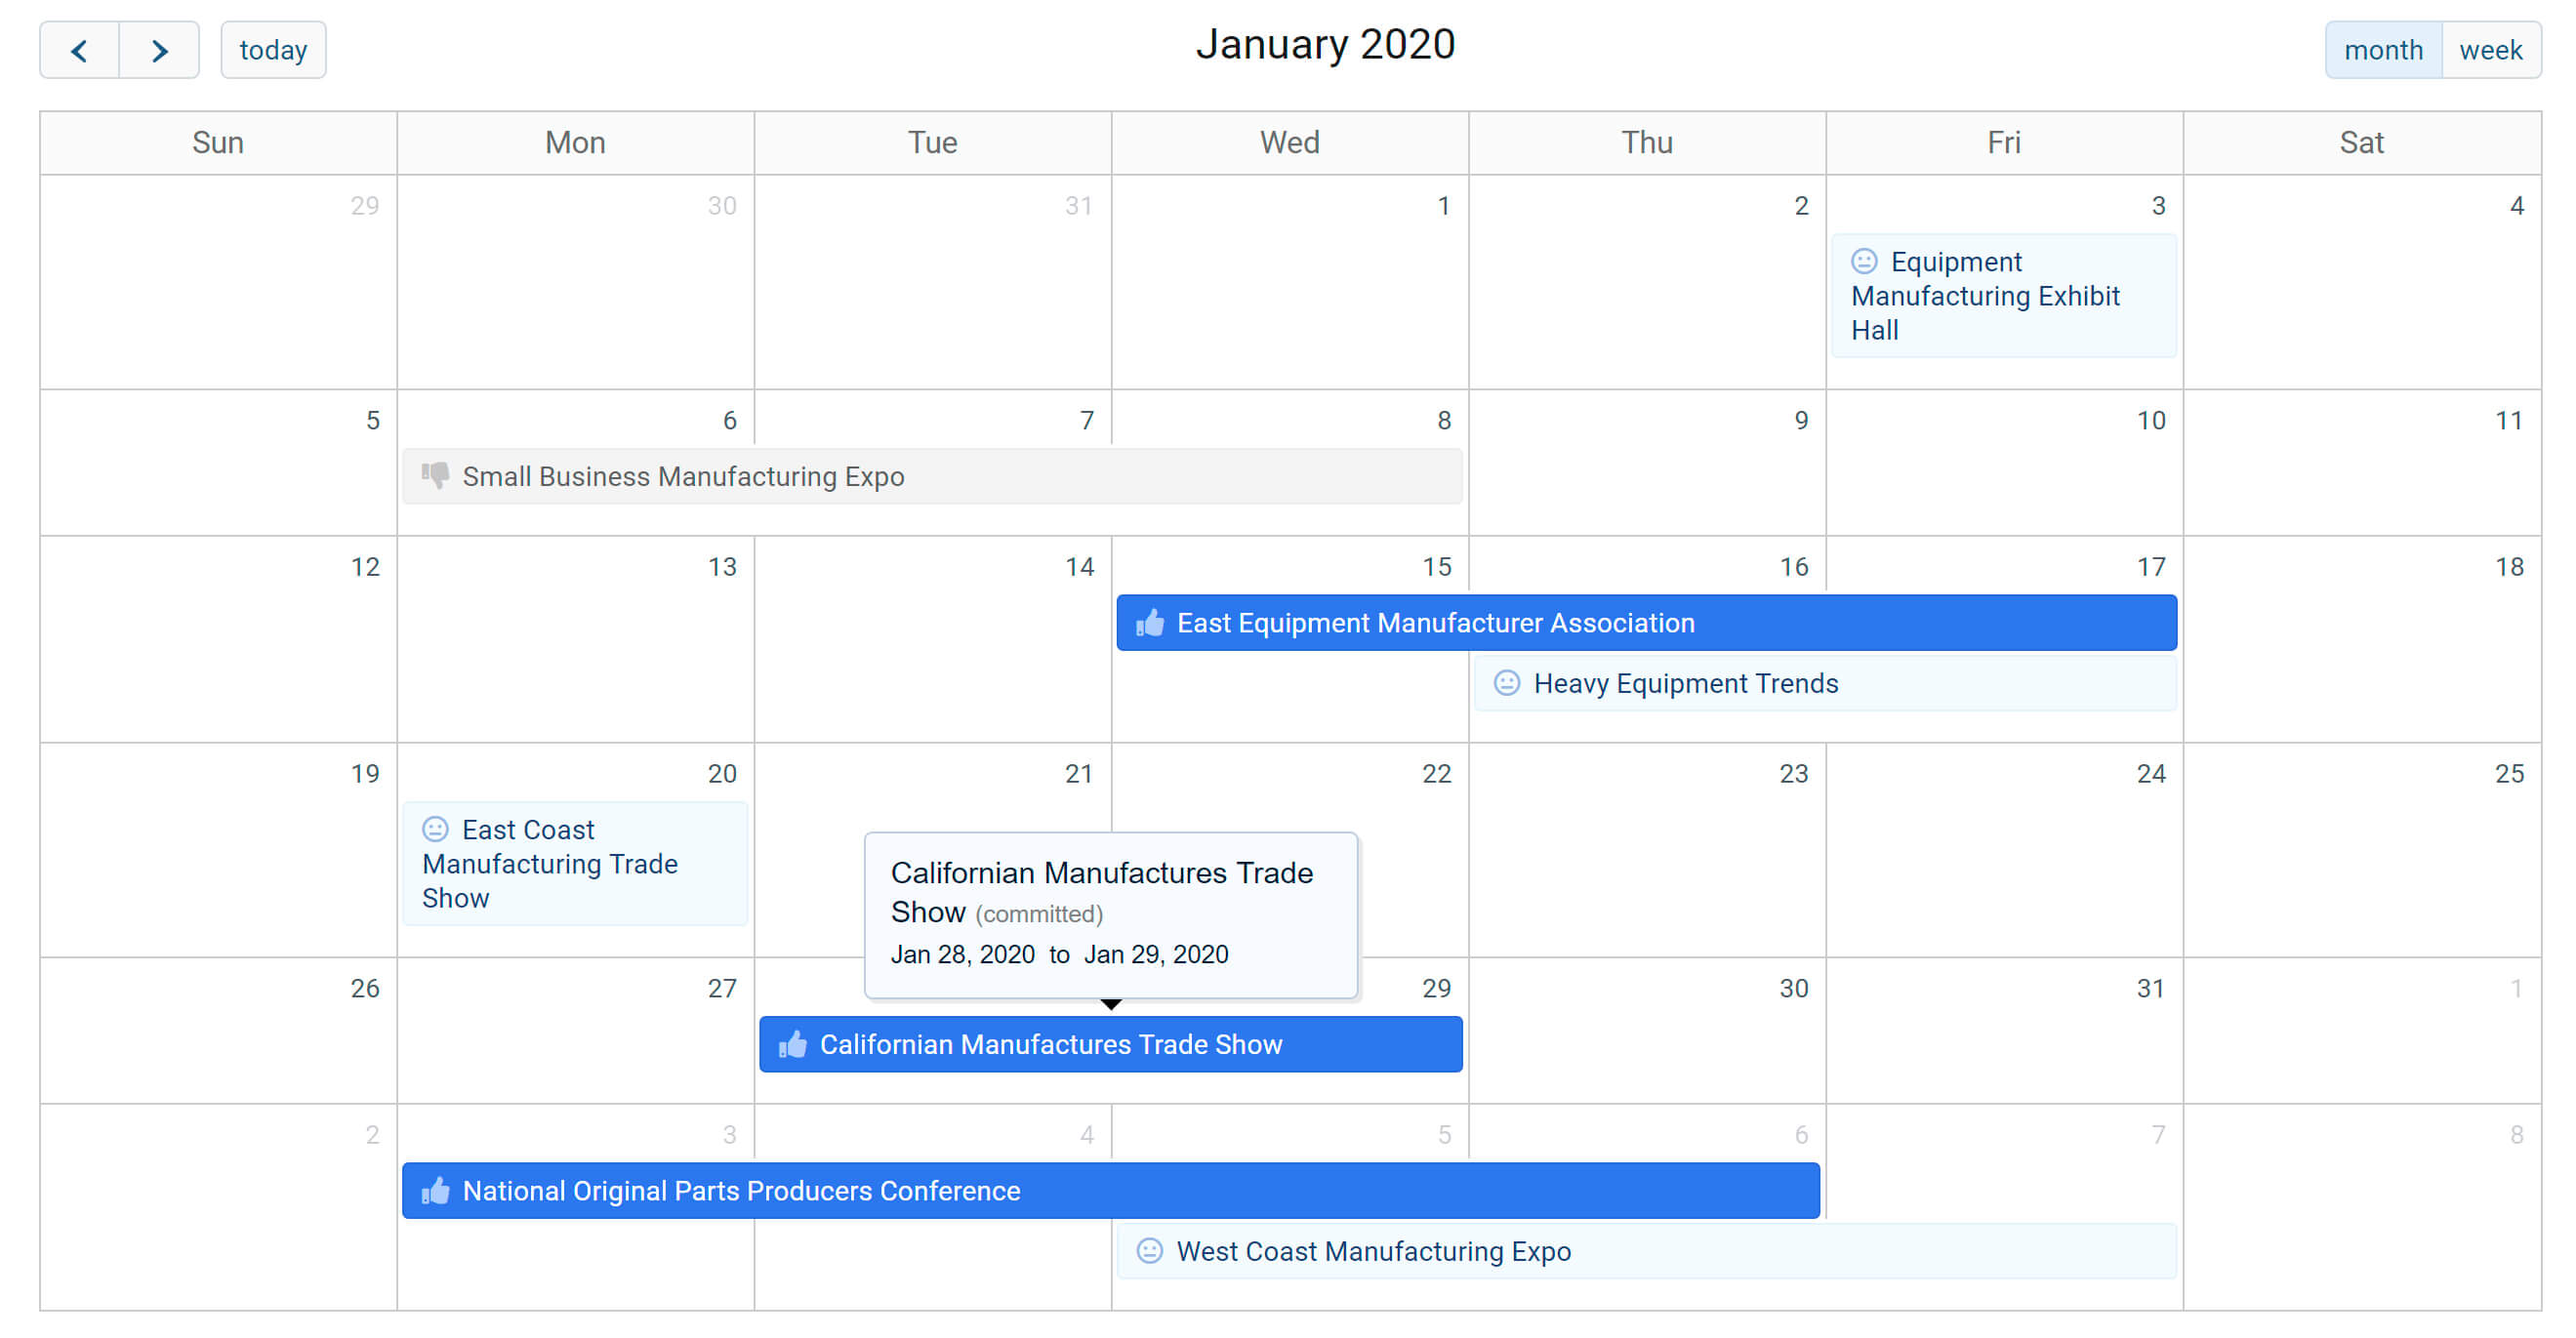 Calendar View of Trade Shows and Exhibits Exhibit Day